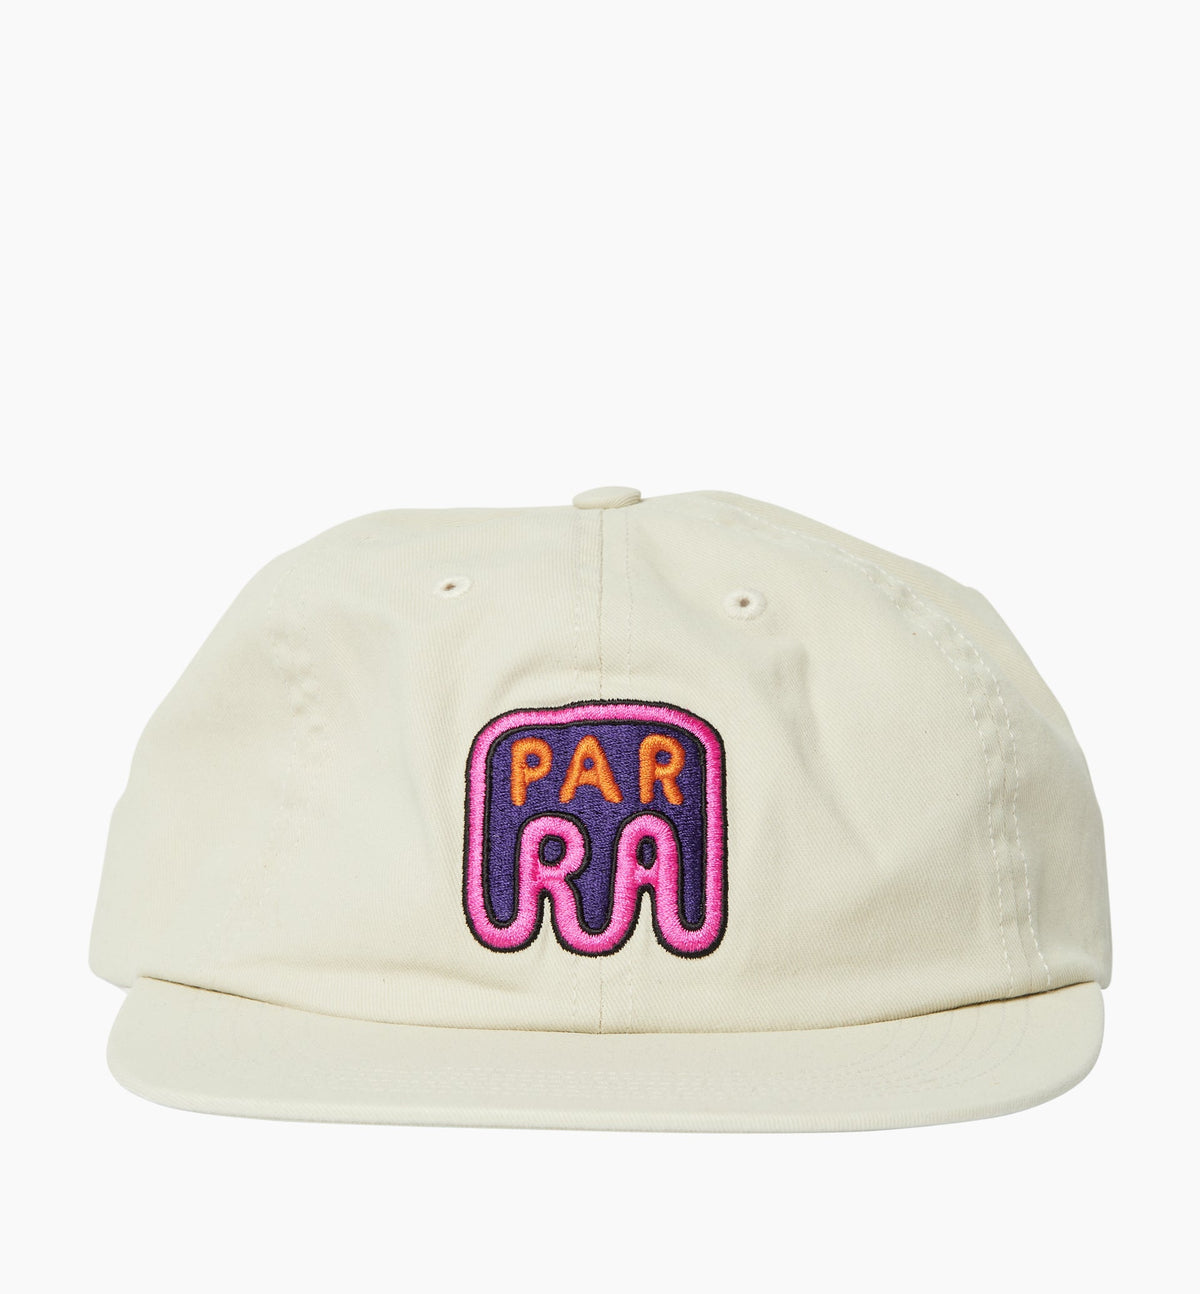 BY PARRA FAST FOOD LOGO 6 PANEL HAT